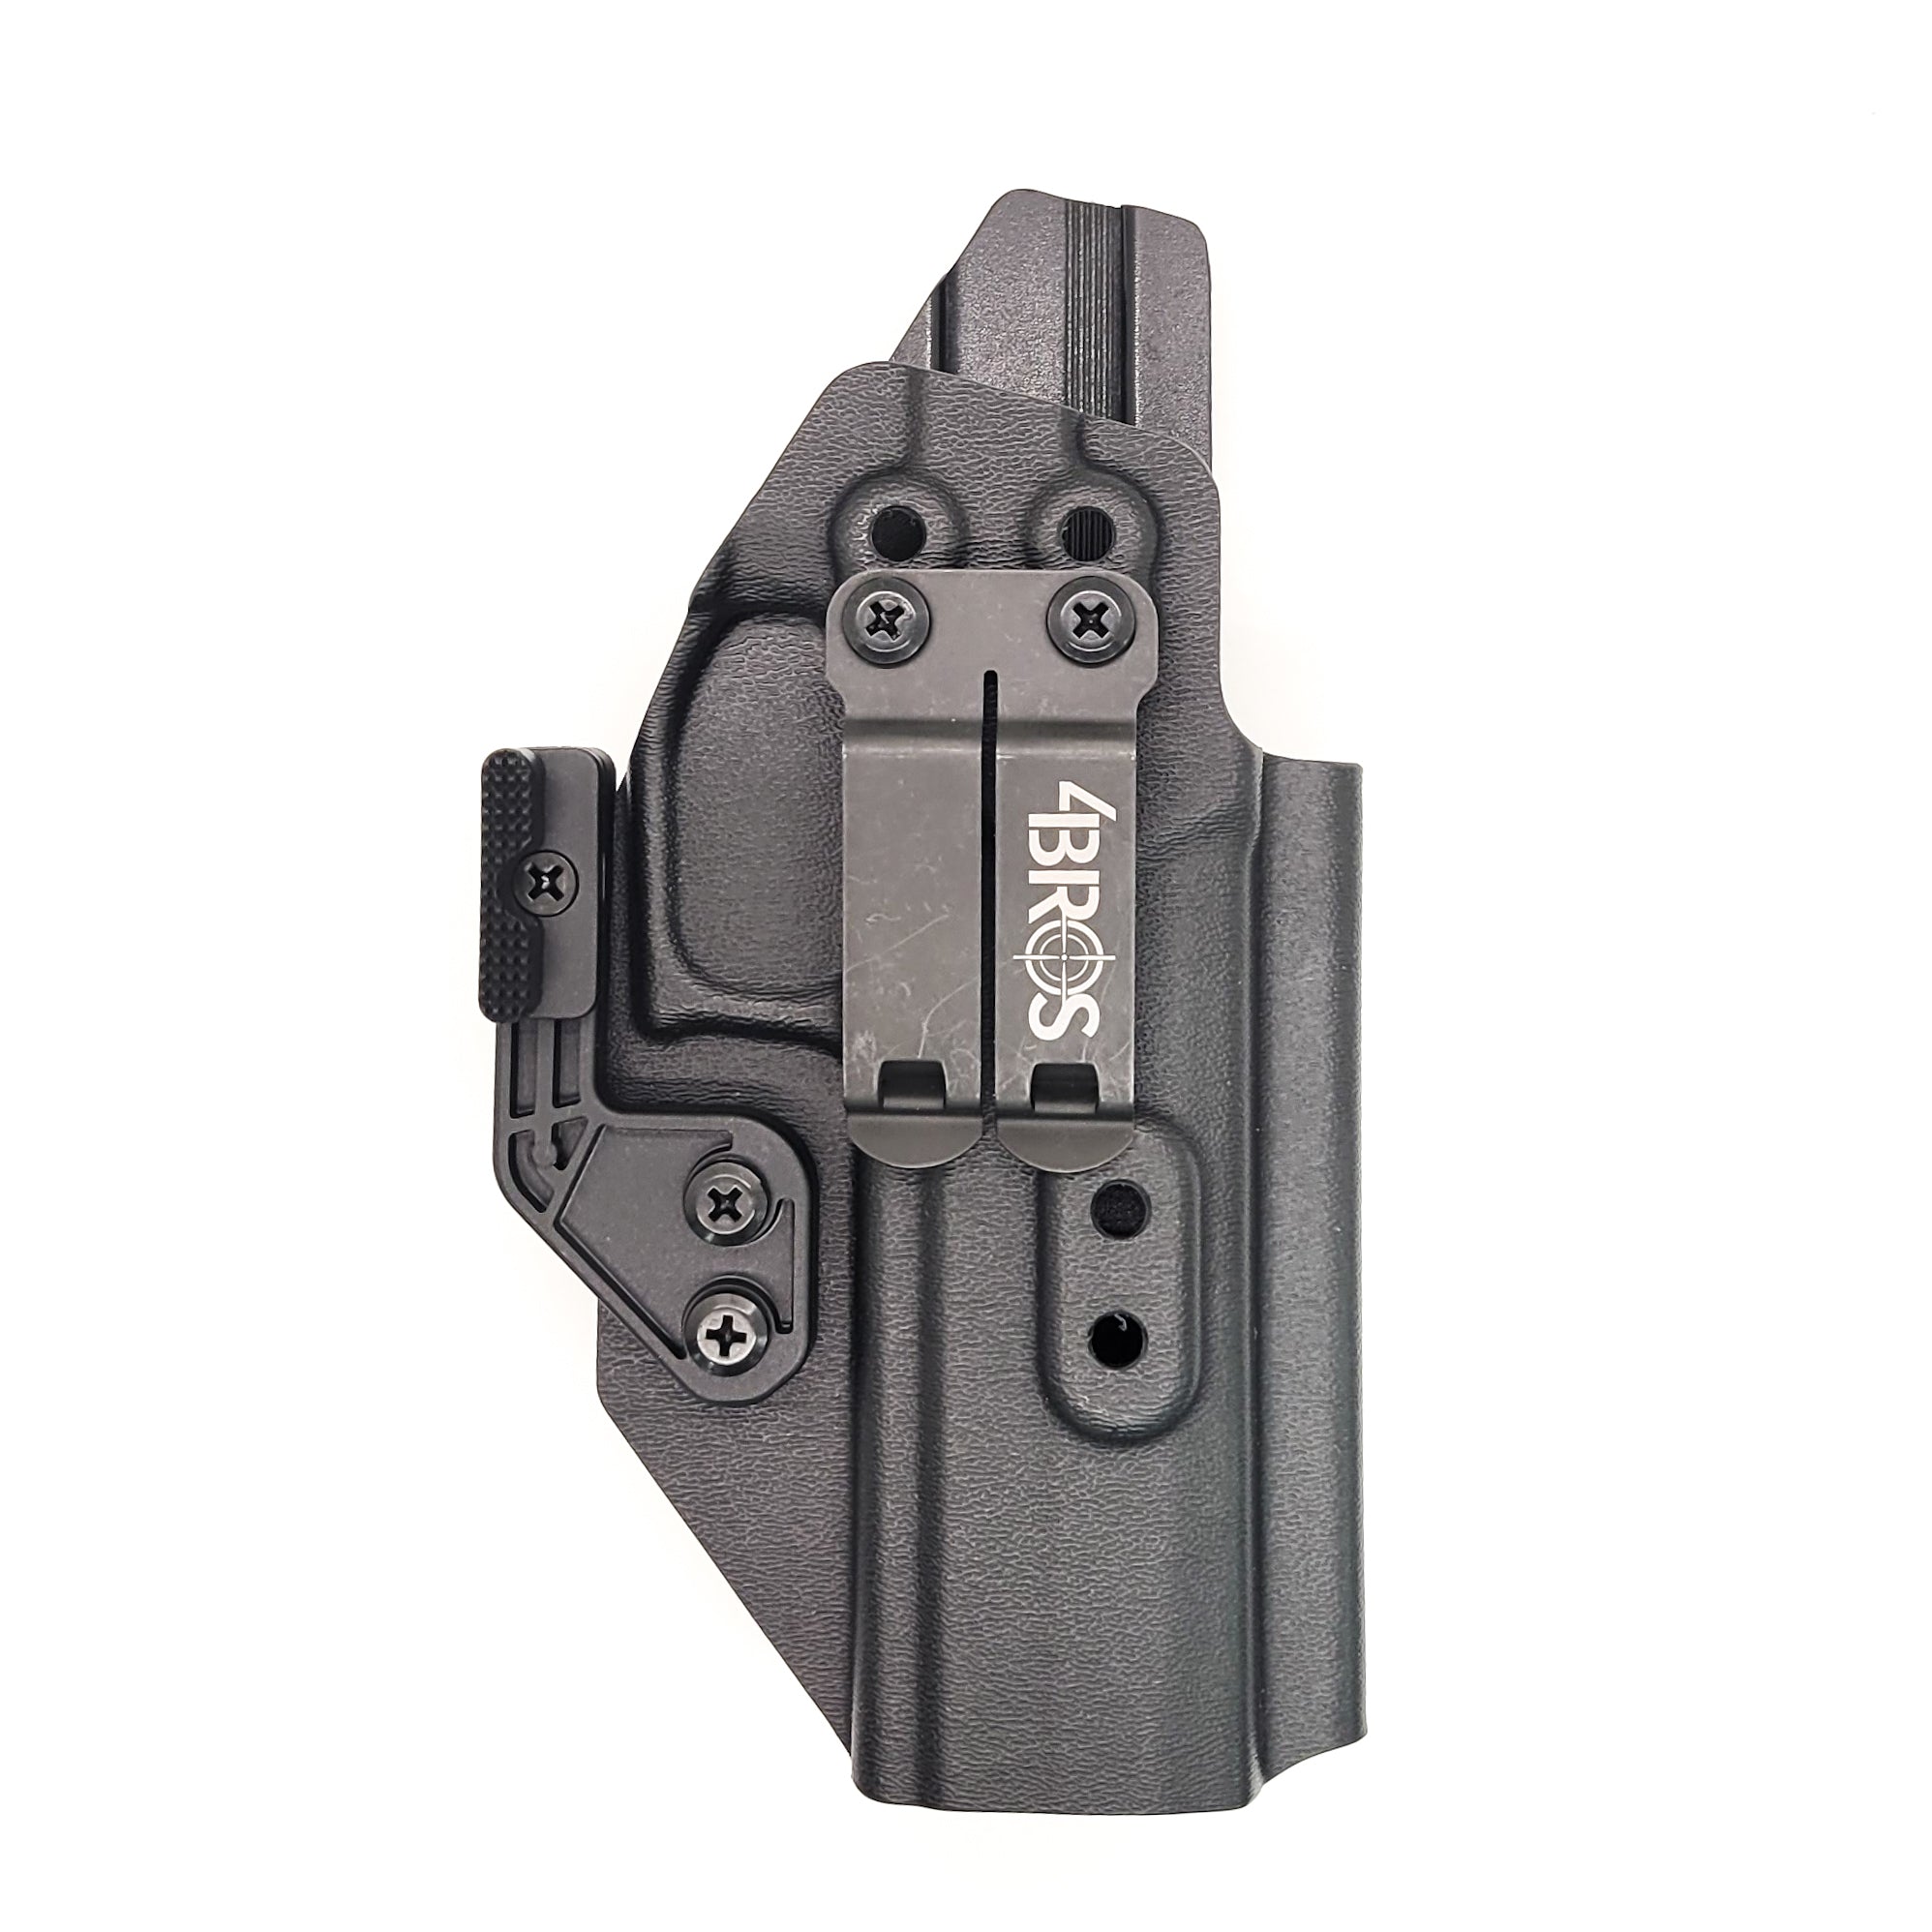 Inside Waistband IWB AIWB Kydex Taco Style Holster designed to fit the Sig Sauer P320 XTEN 10MM with the GoGunsUSA Gas Pedal. Full sweat guard, adjustable retention, open muzzle and profiled for a red dot sight. Proudly made in the USA for veterans and law enforcement. 10 MM P320-XTEN, P320 X Ten or P 320 XTEN.